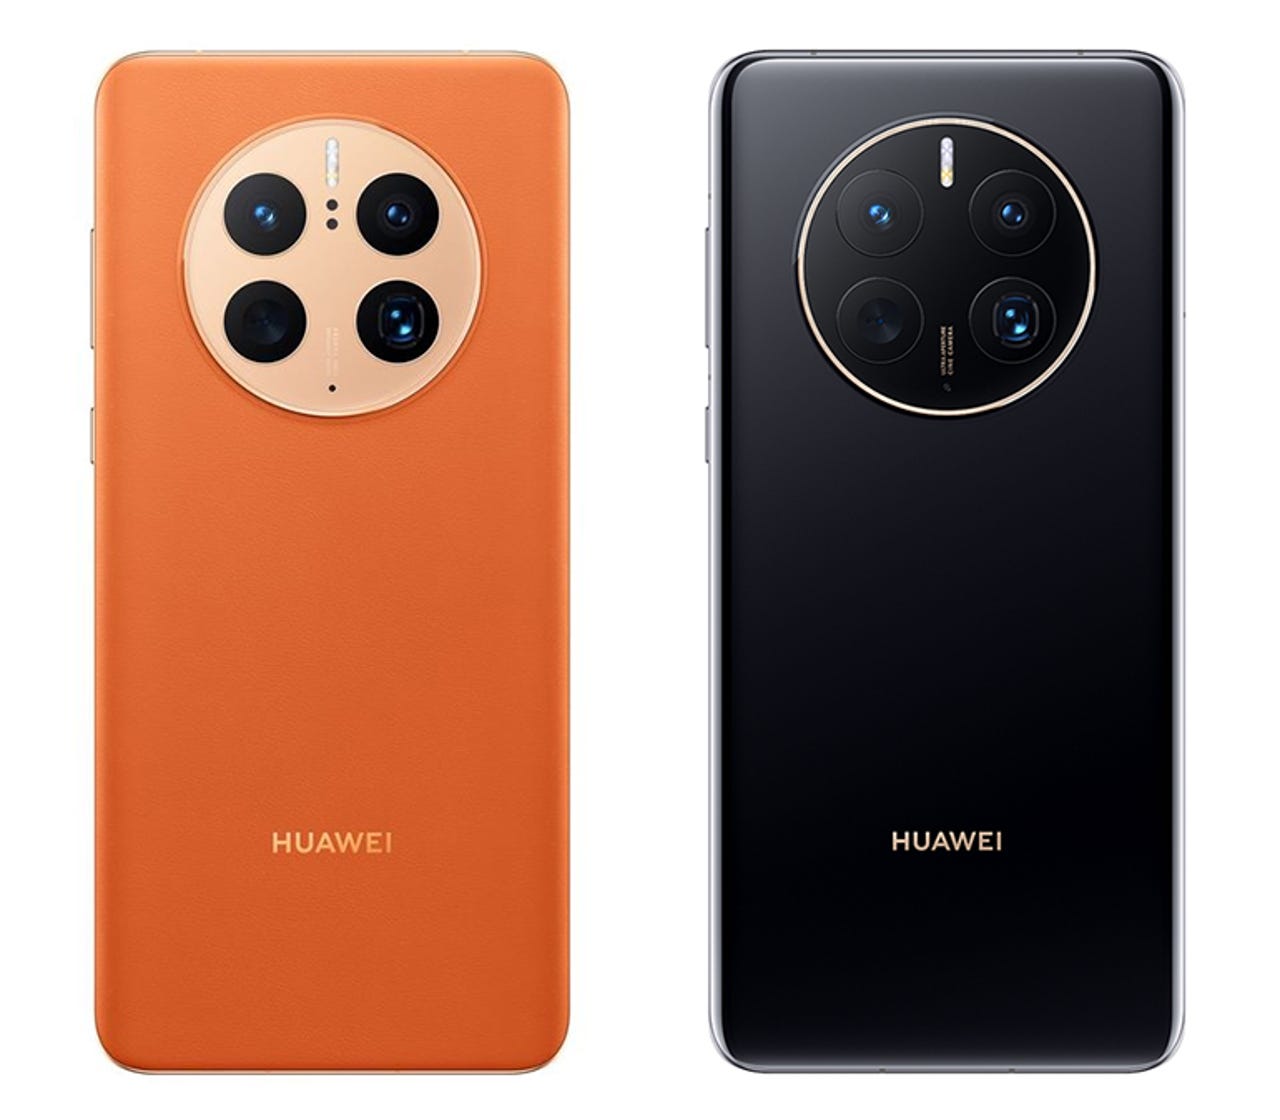 Mate Series] History and Evolution of Huawei's Mate Series Lineup - HUAWEI  Community